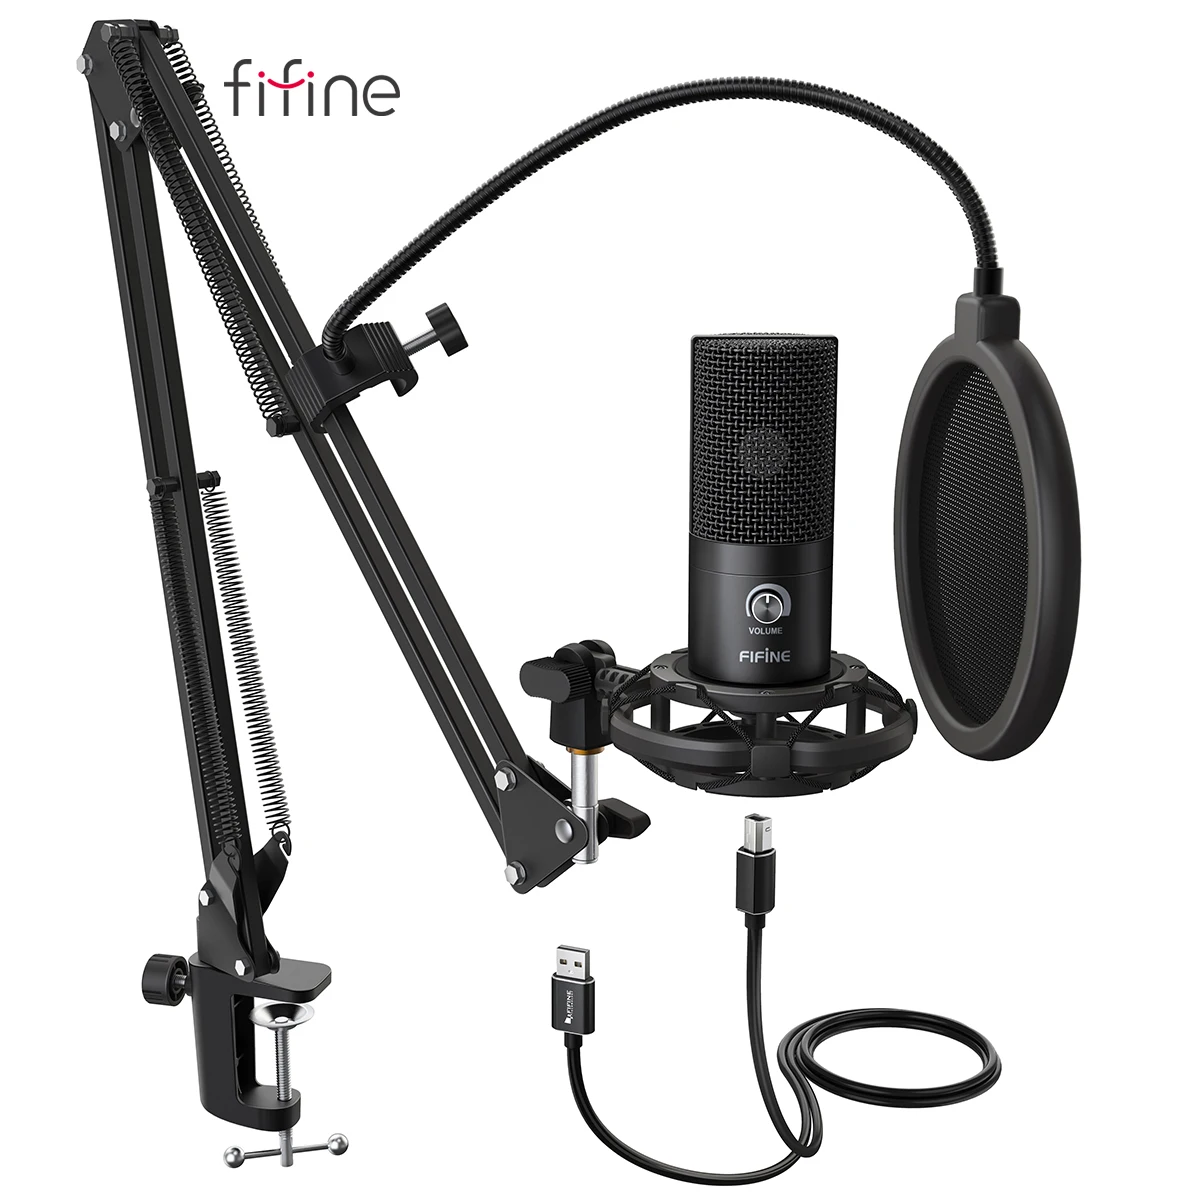 Enlarge FIFINE Studio Condenser USB Computer Microphone Kit With Adjustable Scissor Arm Stand Shock Mount for YouTube Voice Overs-T669